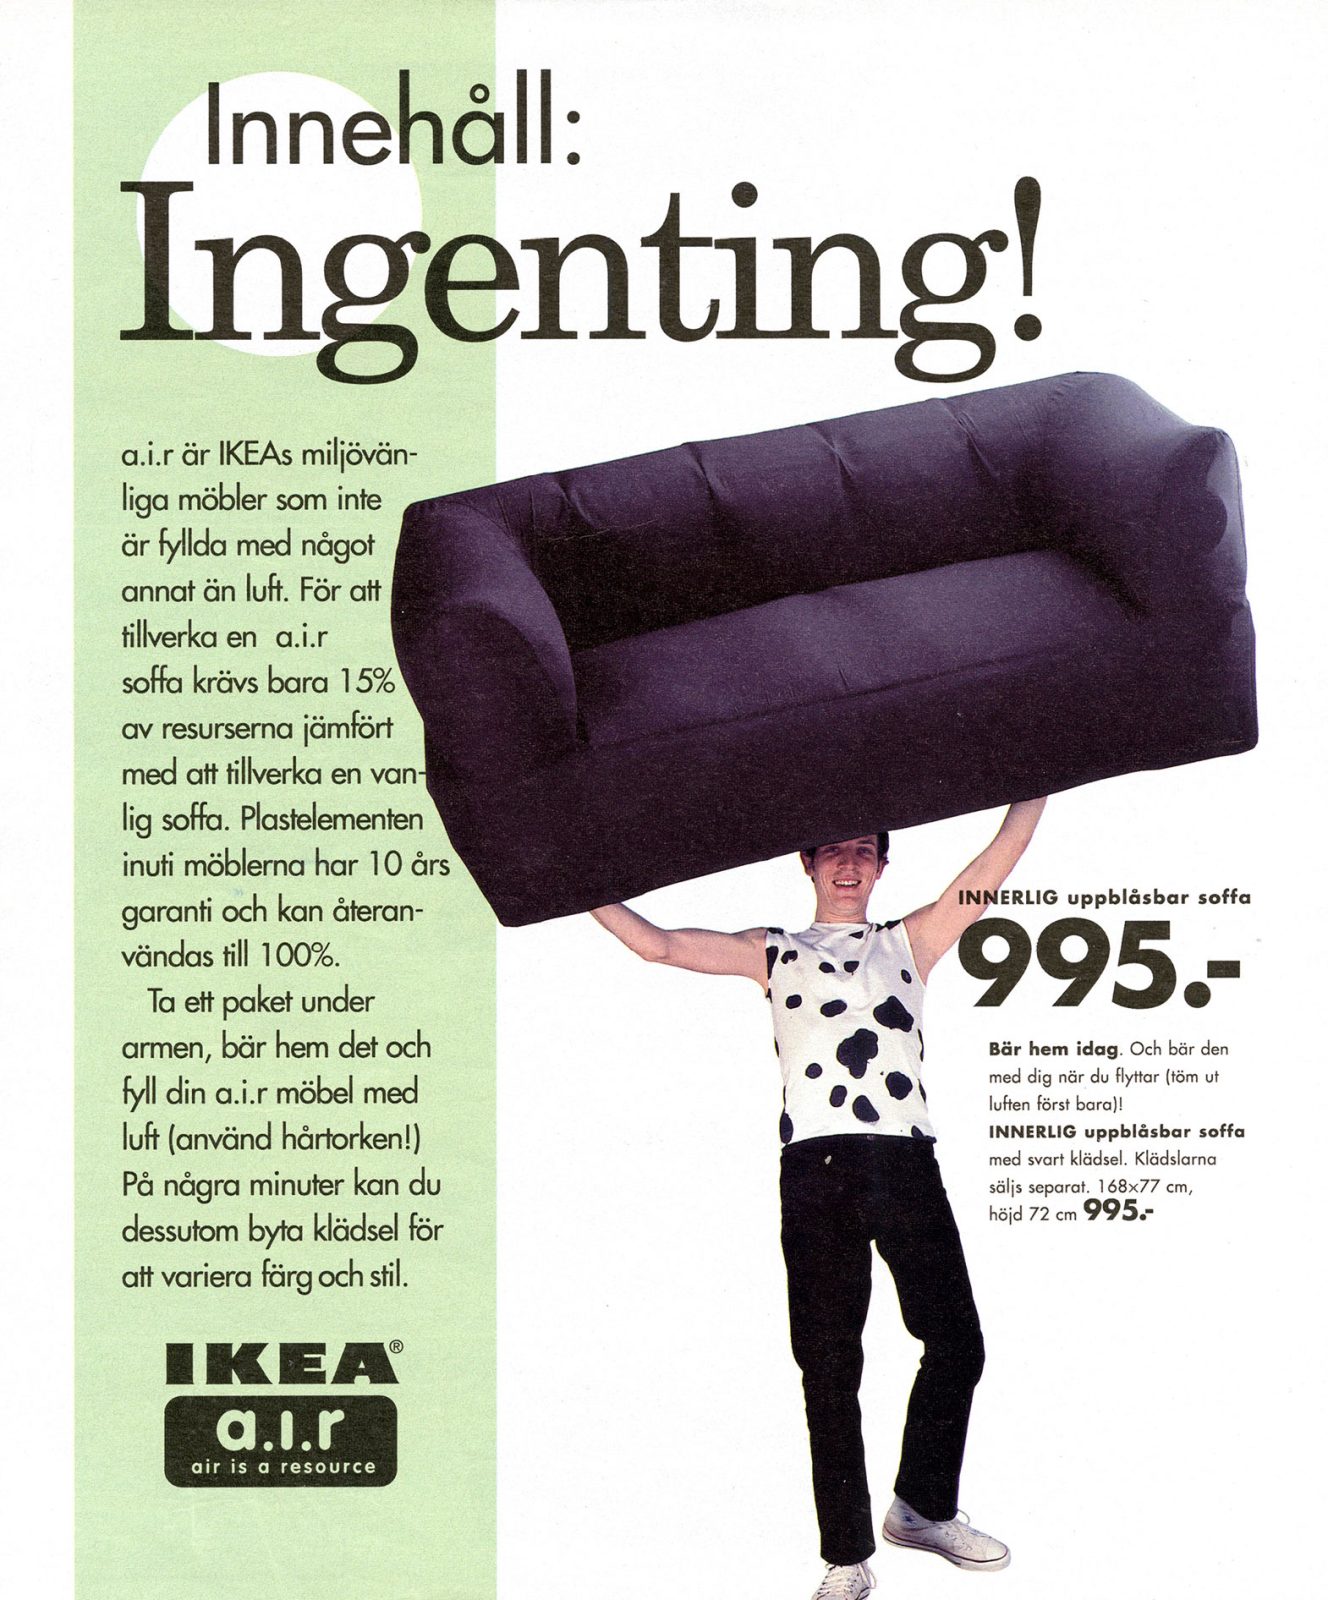 IKEA catalogue page, man lifting sofa over his head next to text on inflatable furniture in the IKEA a.i.r collection.